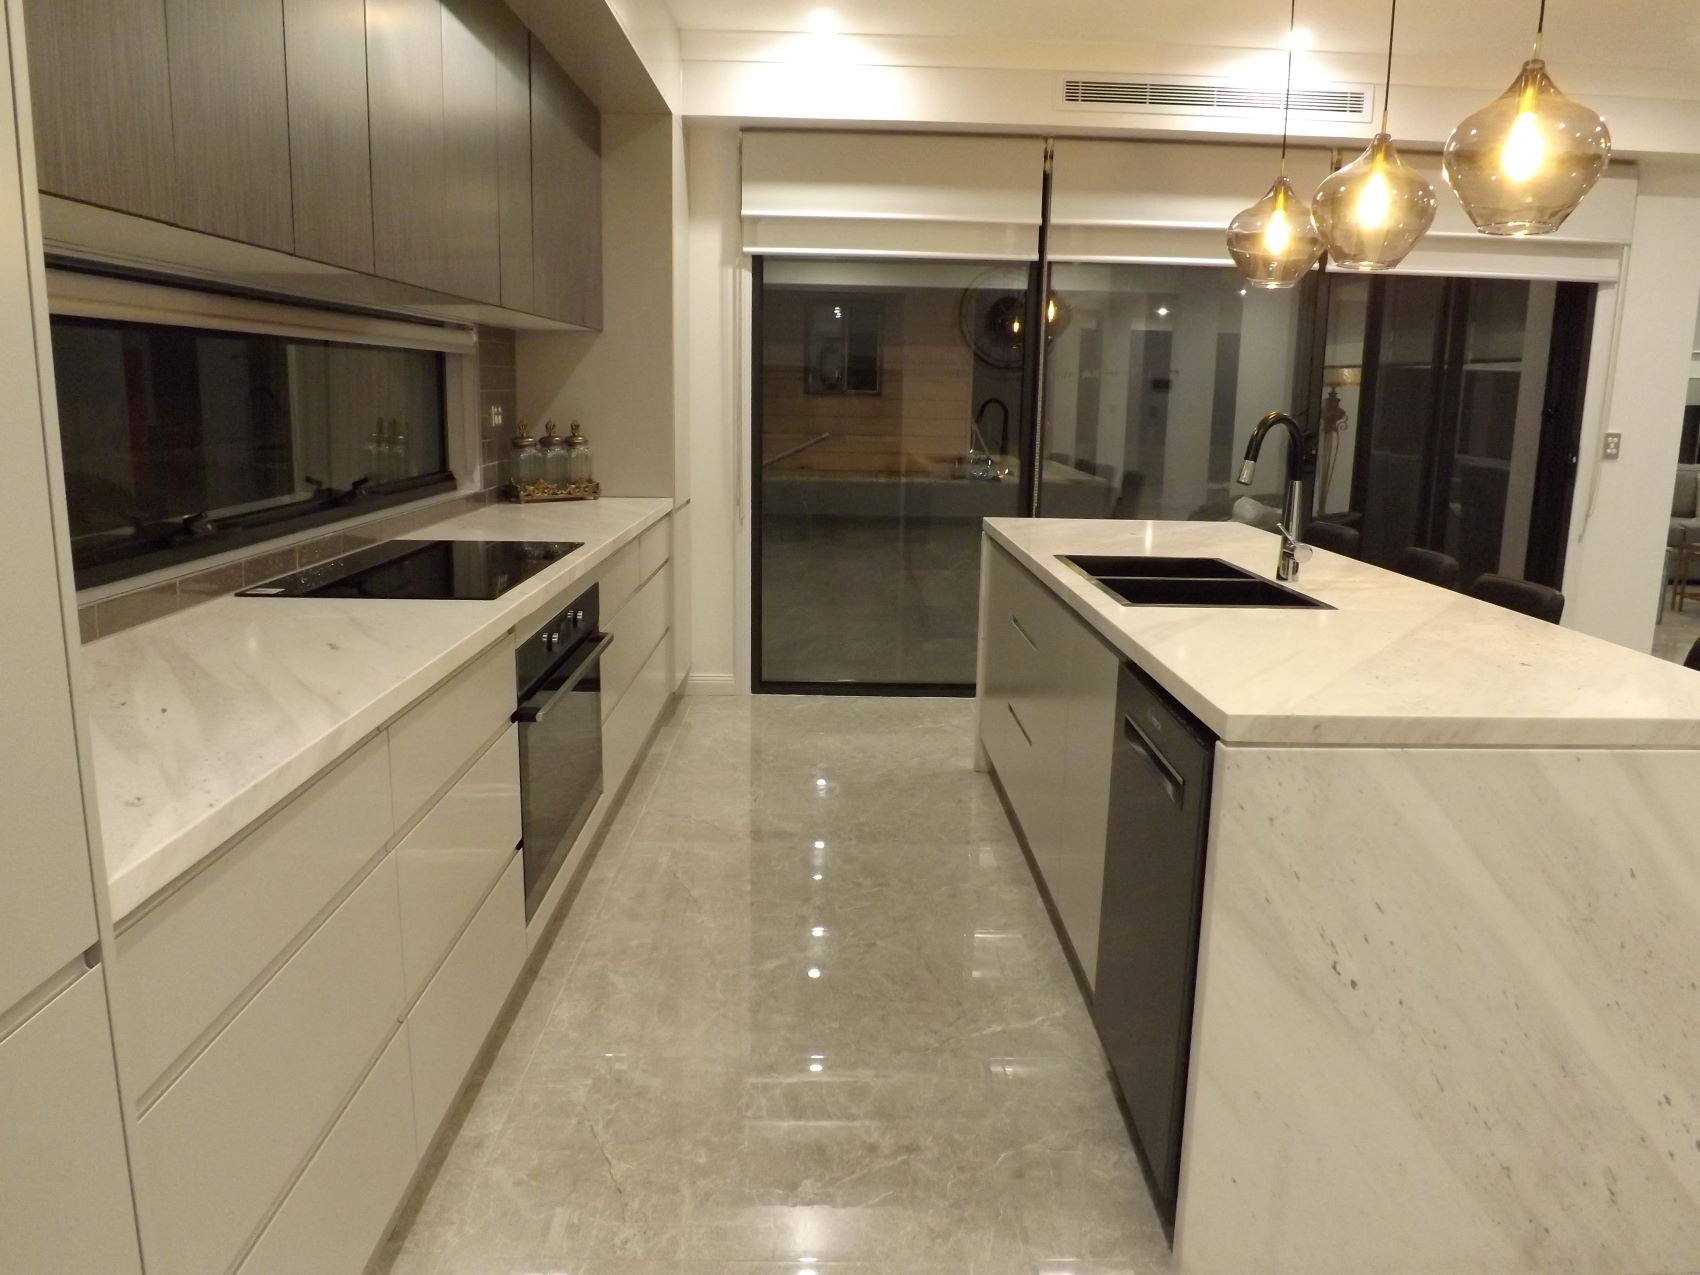 Glenmore gally shaped kitchen remodelling.